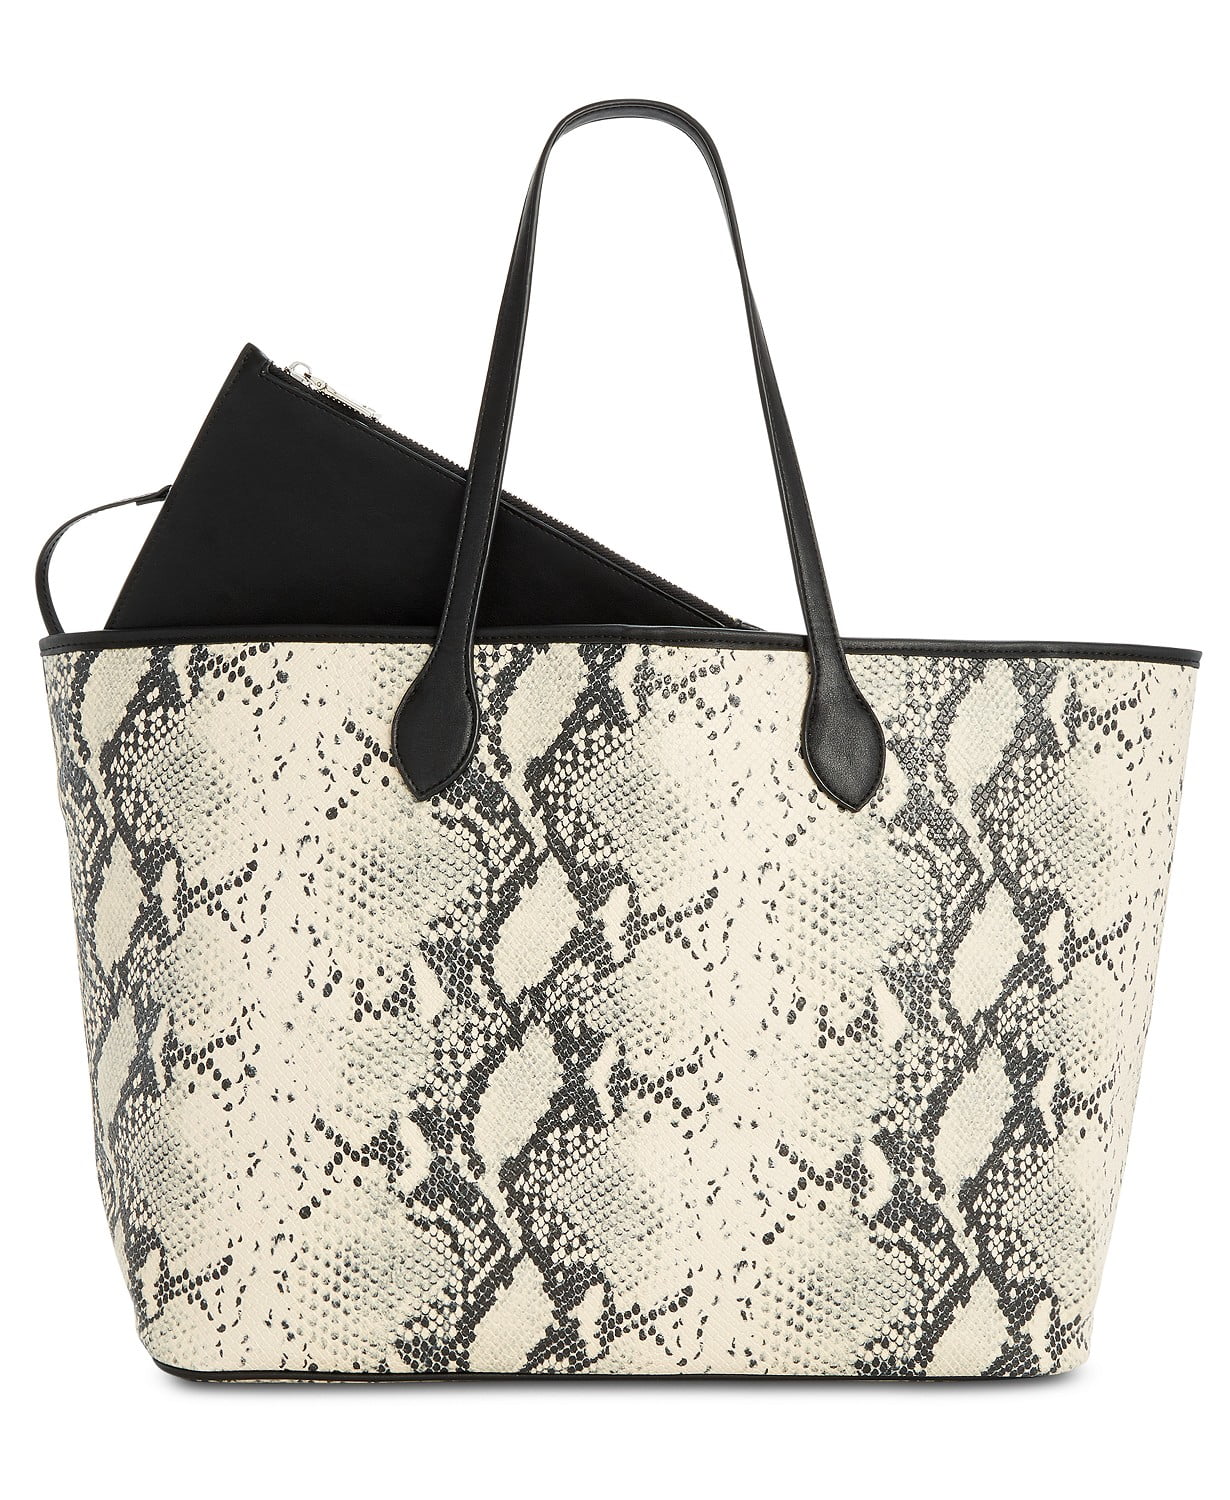 www.couturepoint.com-steve-madden-python-print-lindy-tote-bag